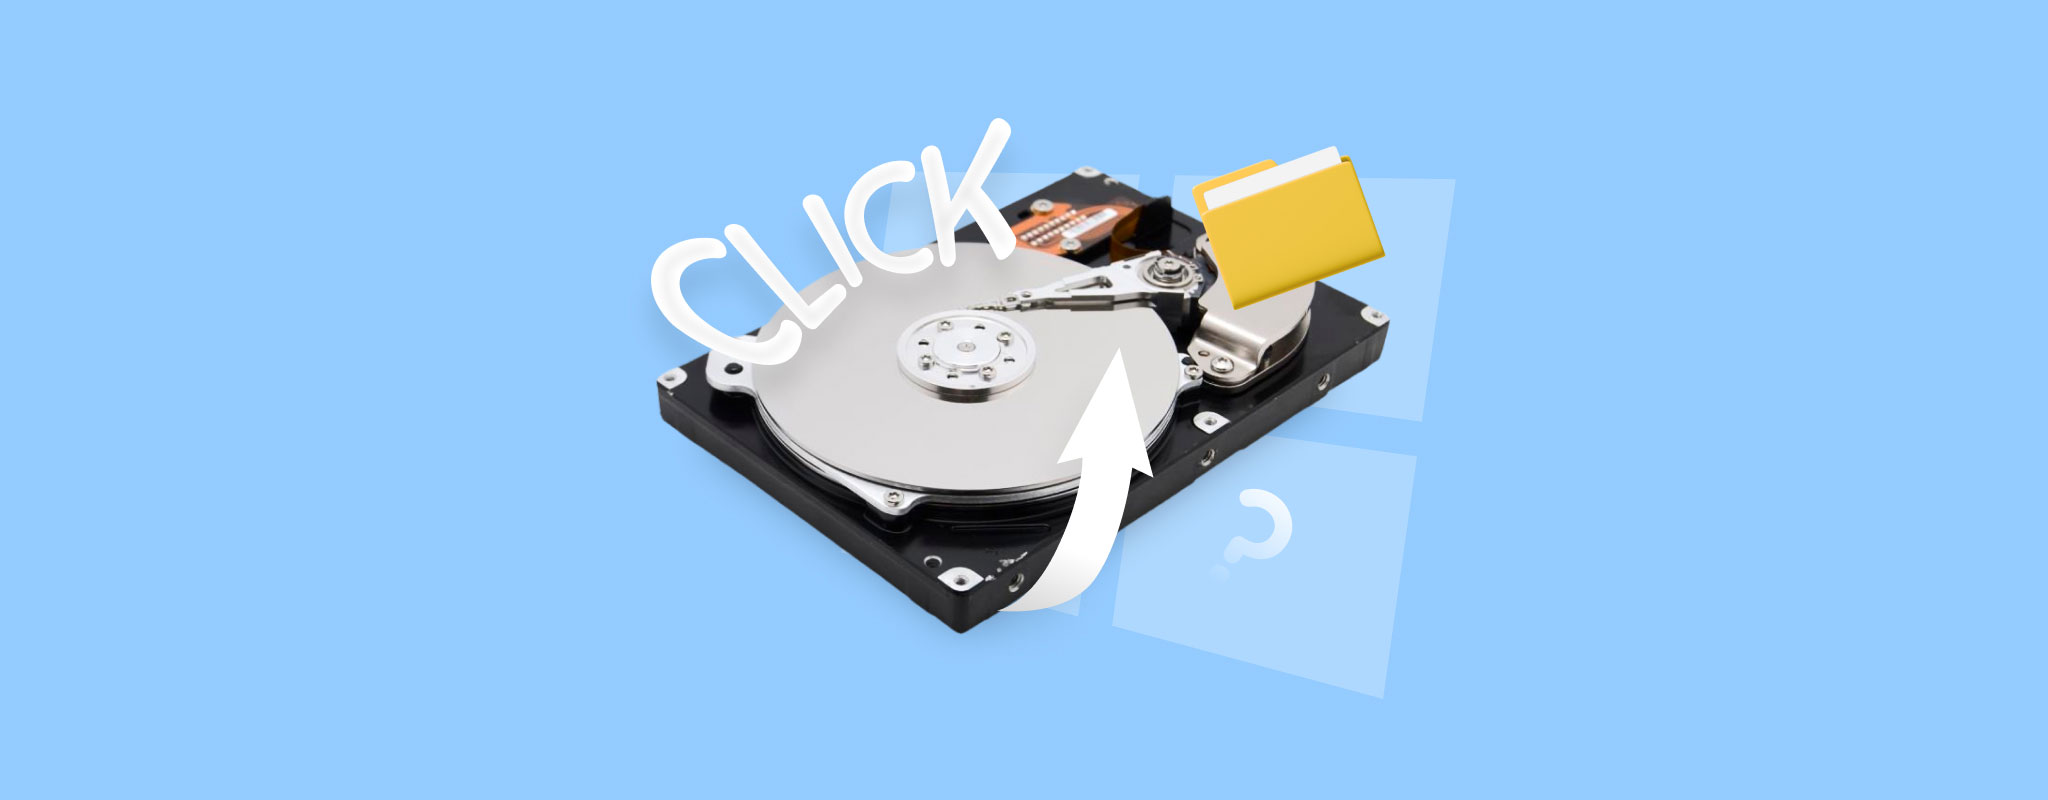 recover clicking hard drive